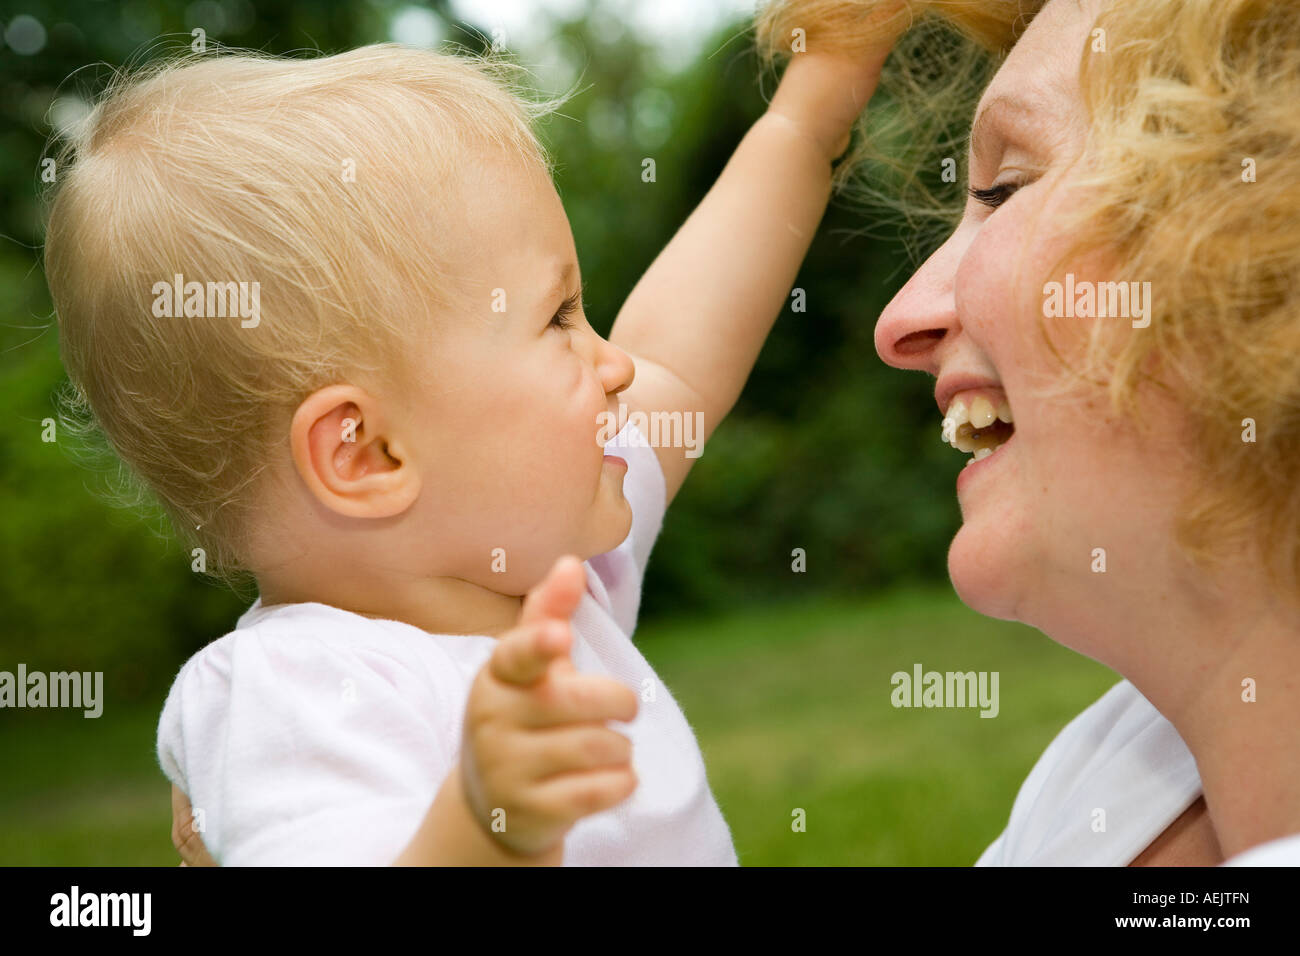 A young woman and her 10 month old baby girl Stock Photo